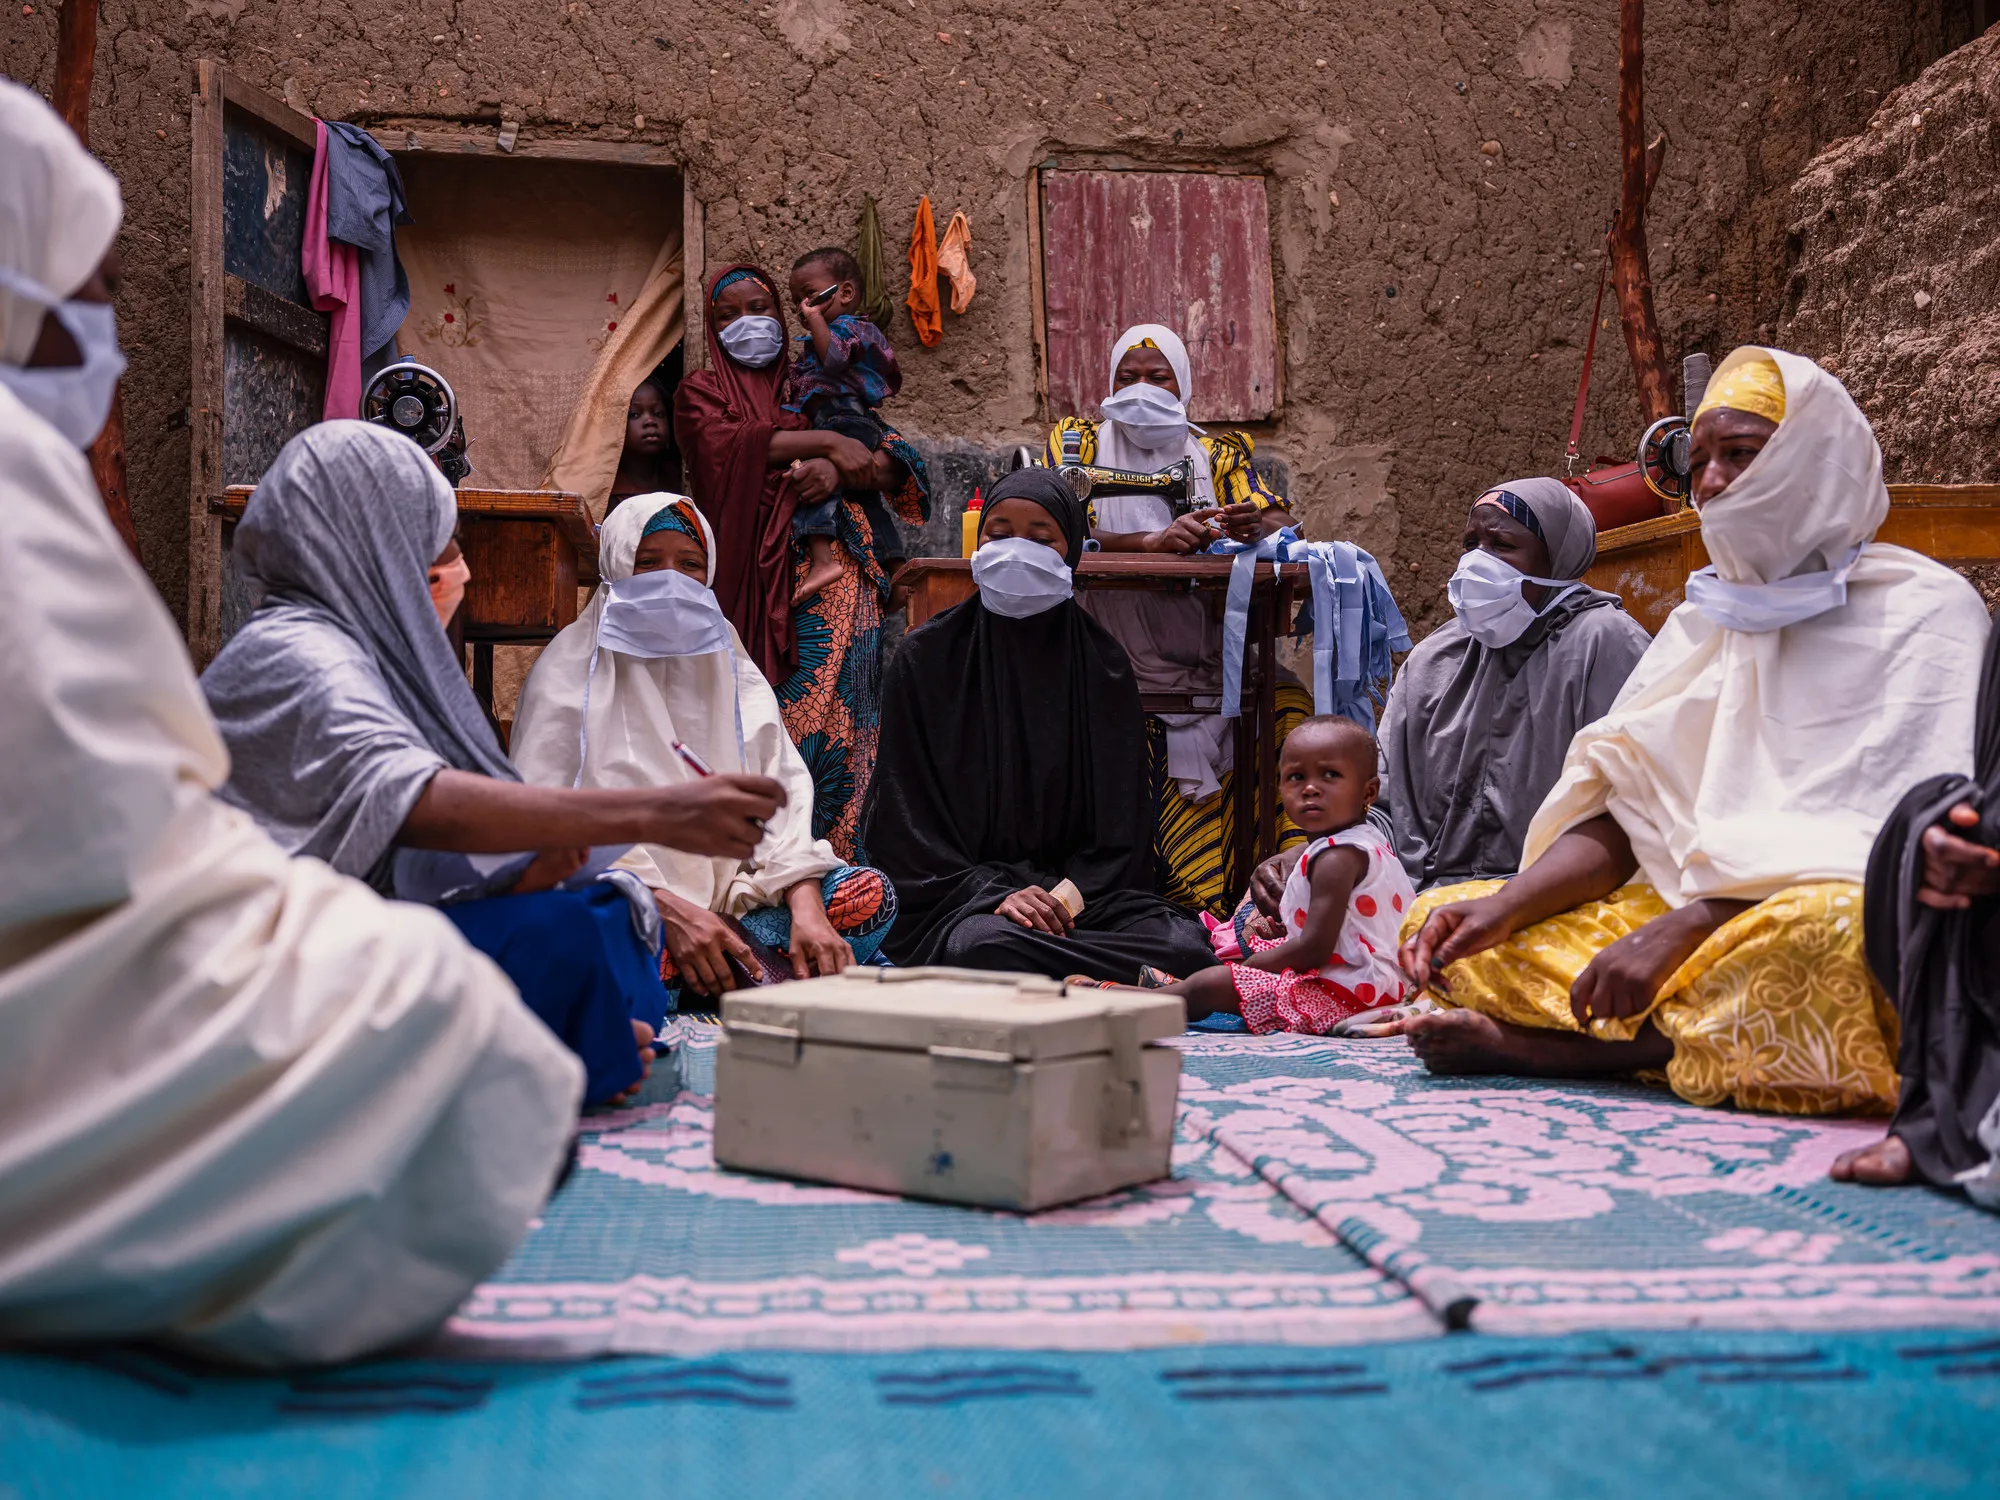 A group of women in a meeting while sitting on a rug with a money lockbox .